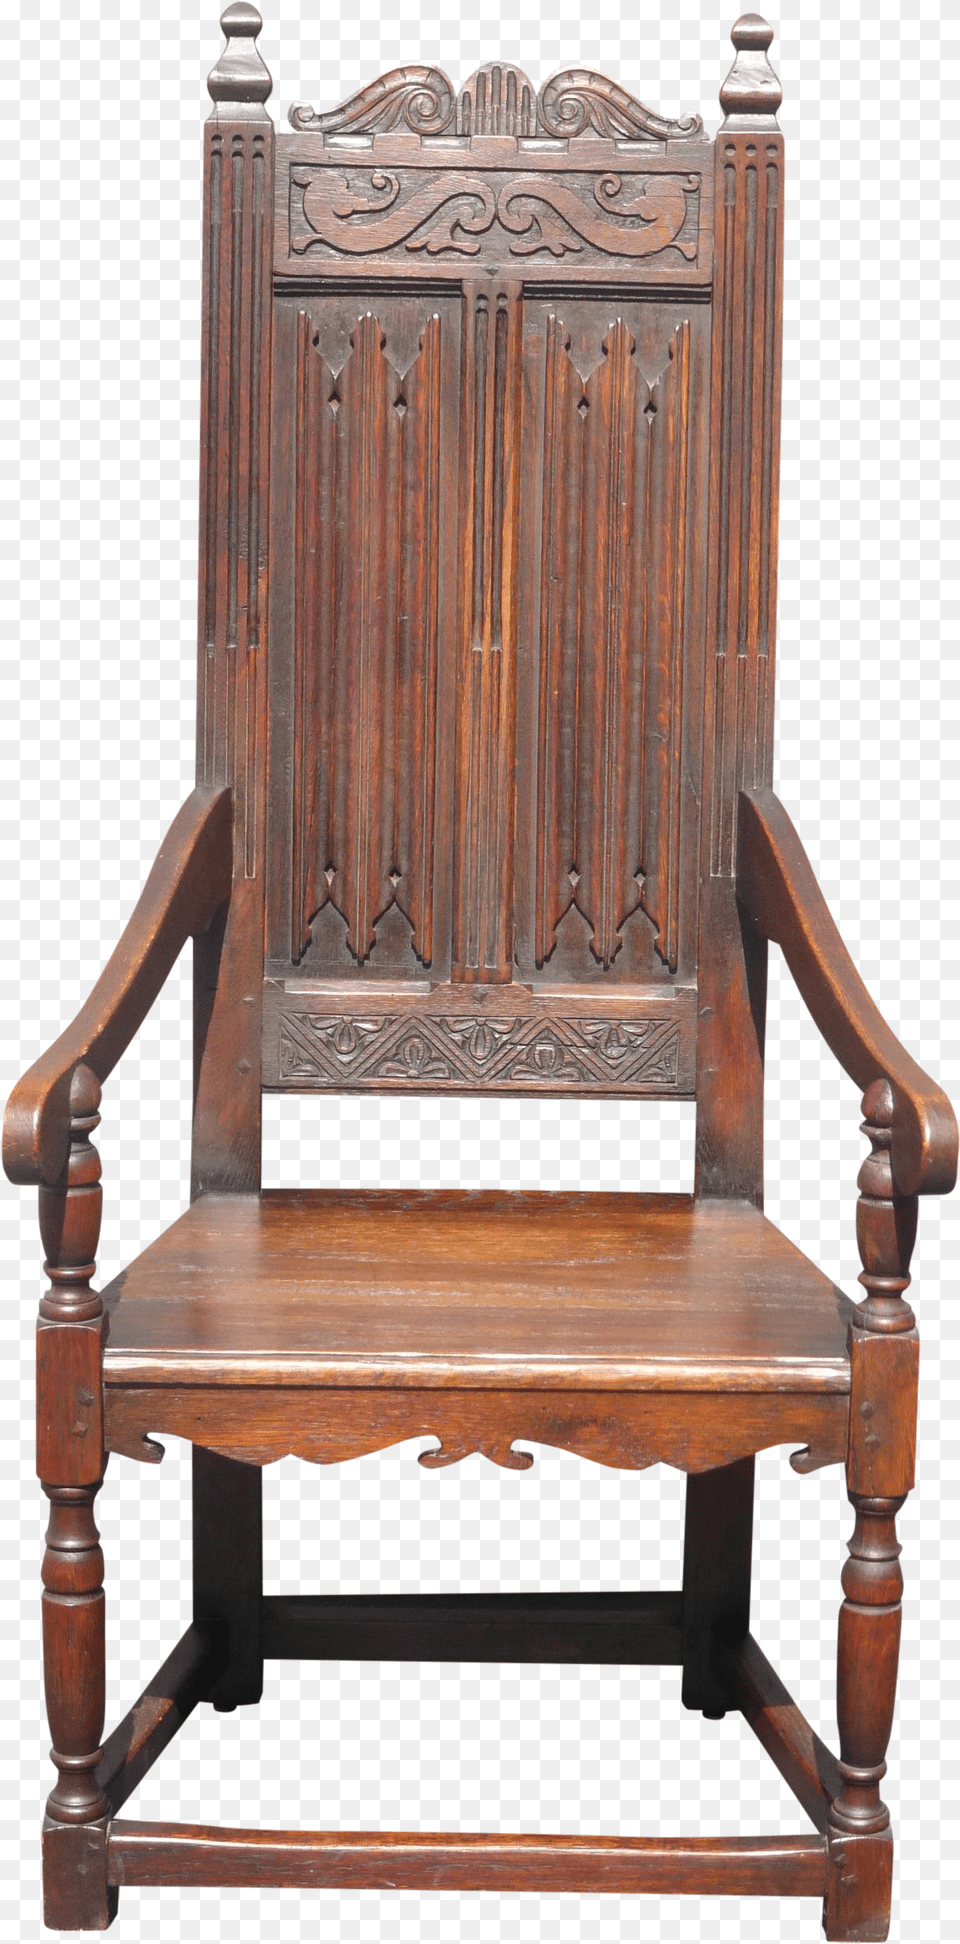 Wooden Throne Dining Chair, Furniture, Crib, Infant Bed, Armchair Free Png